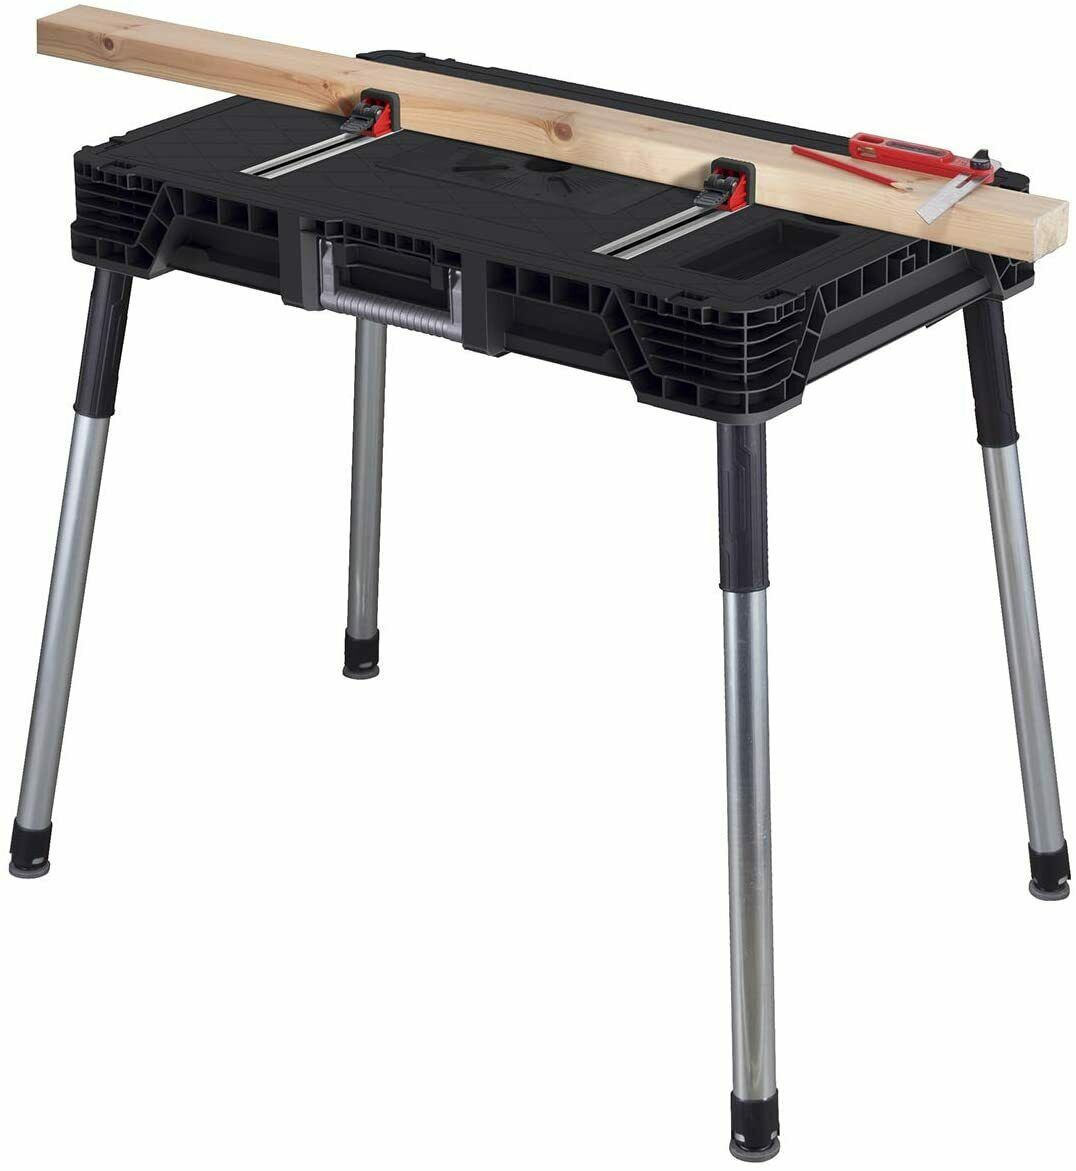 Keter Jobmade Portable Work Bench And Miter Saw Table For Woodworking Tools